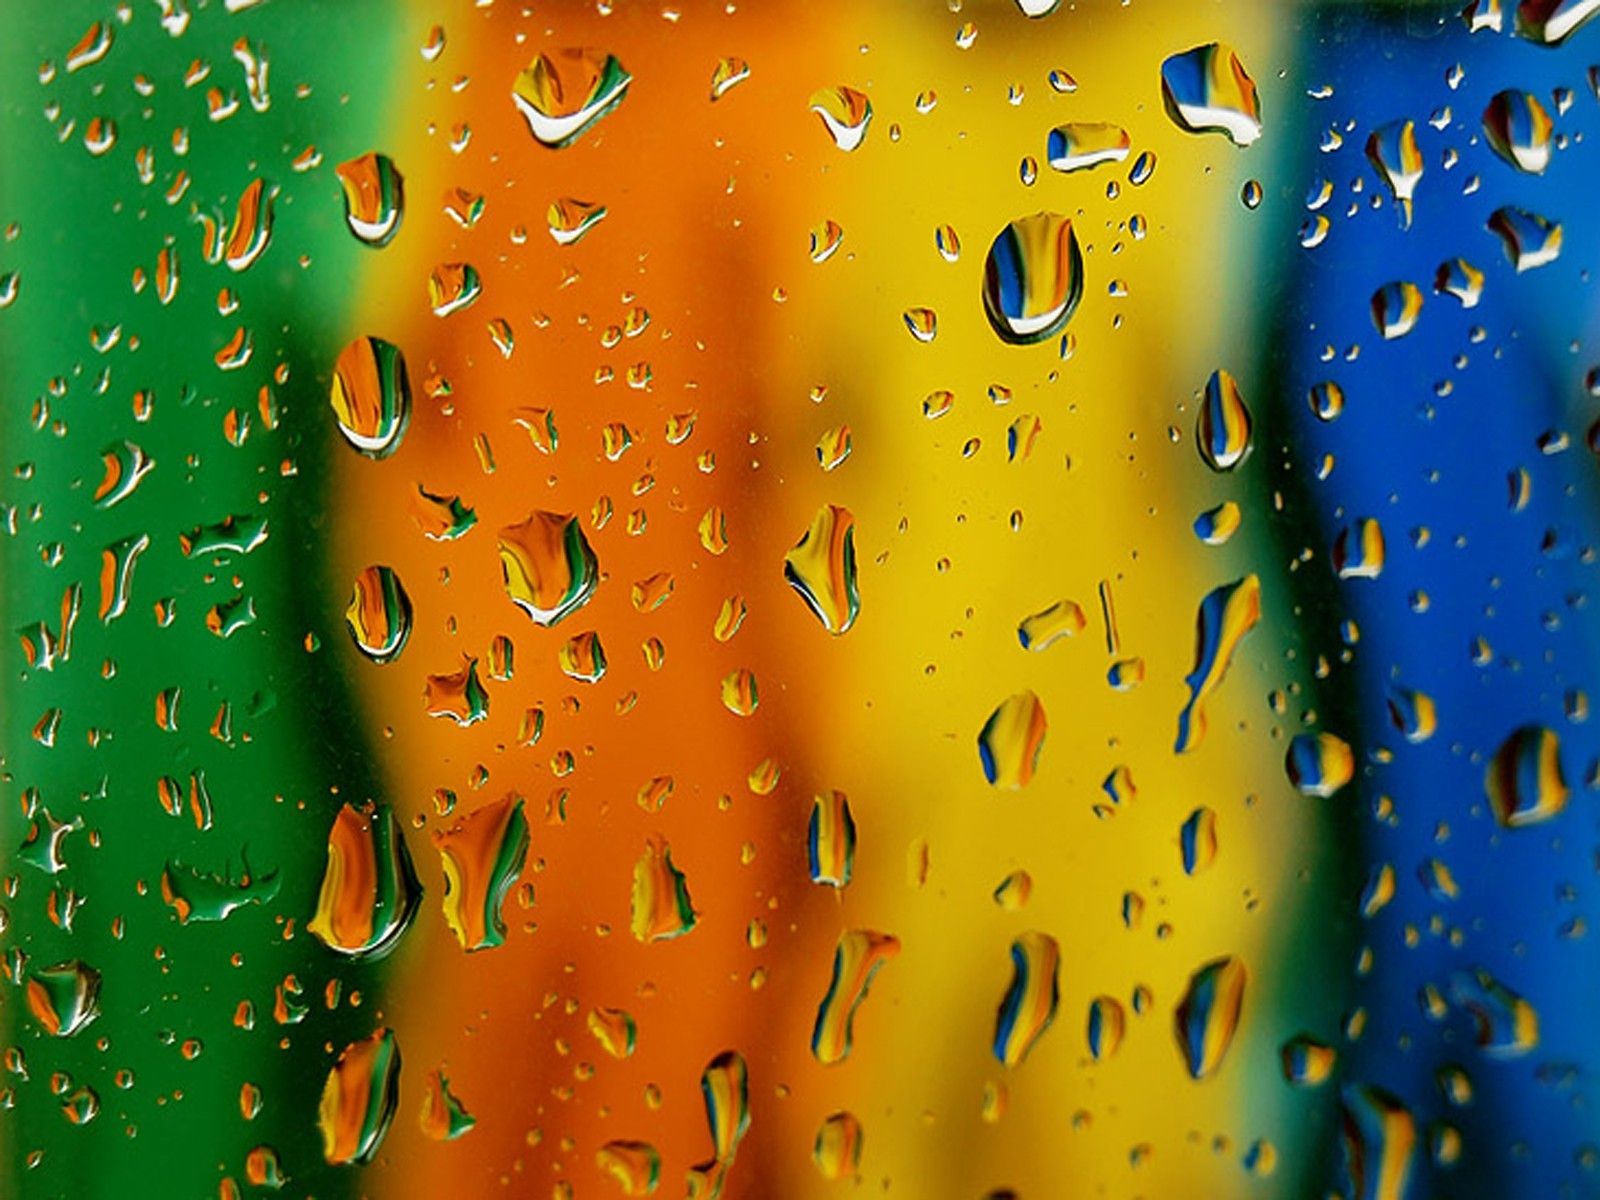 Awesome HD Wallpaper Collection: Rainbow View from Wet Glass